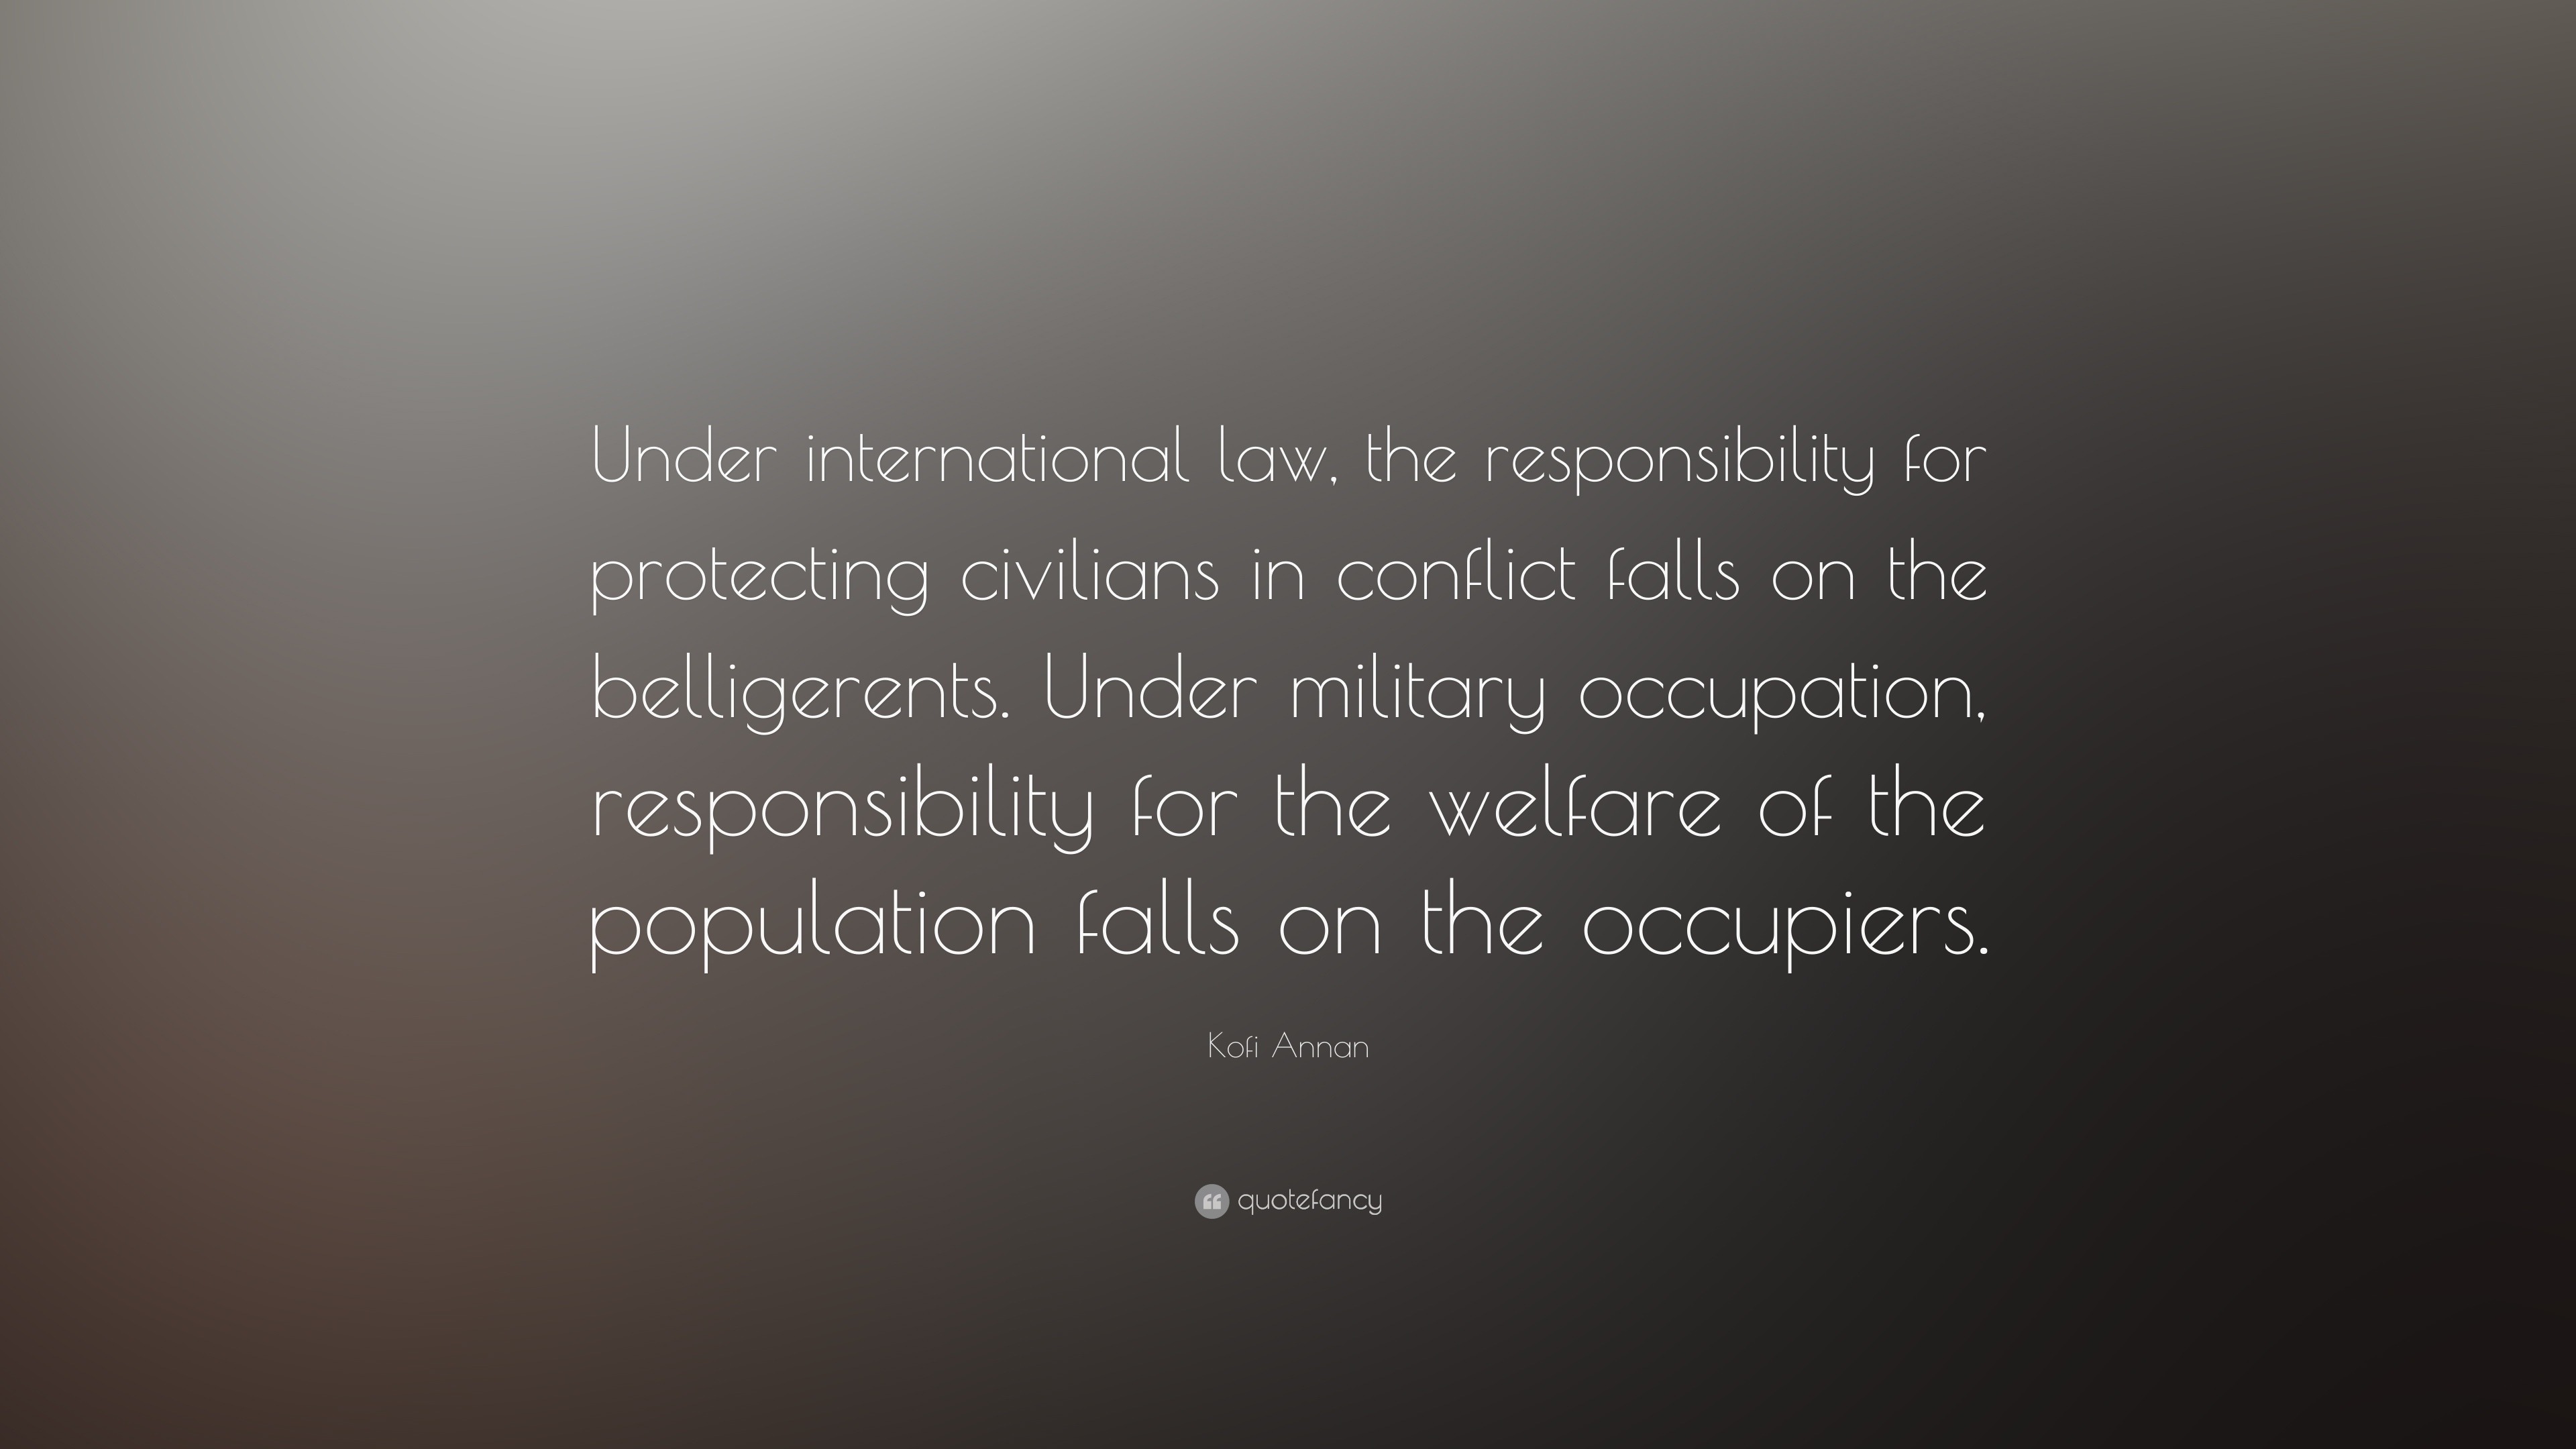 Kofi Annan Quote: “Under international law, the responsibility for